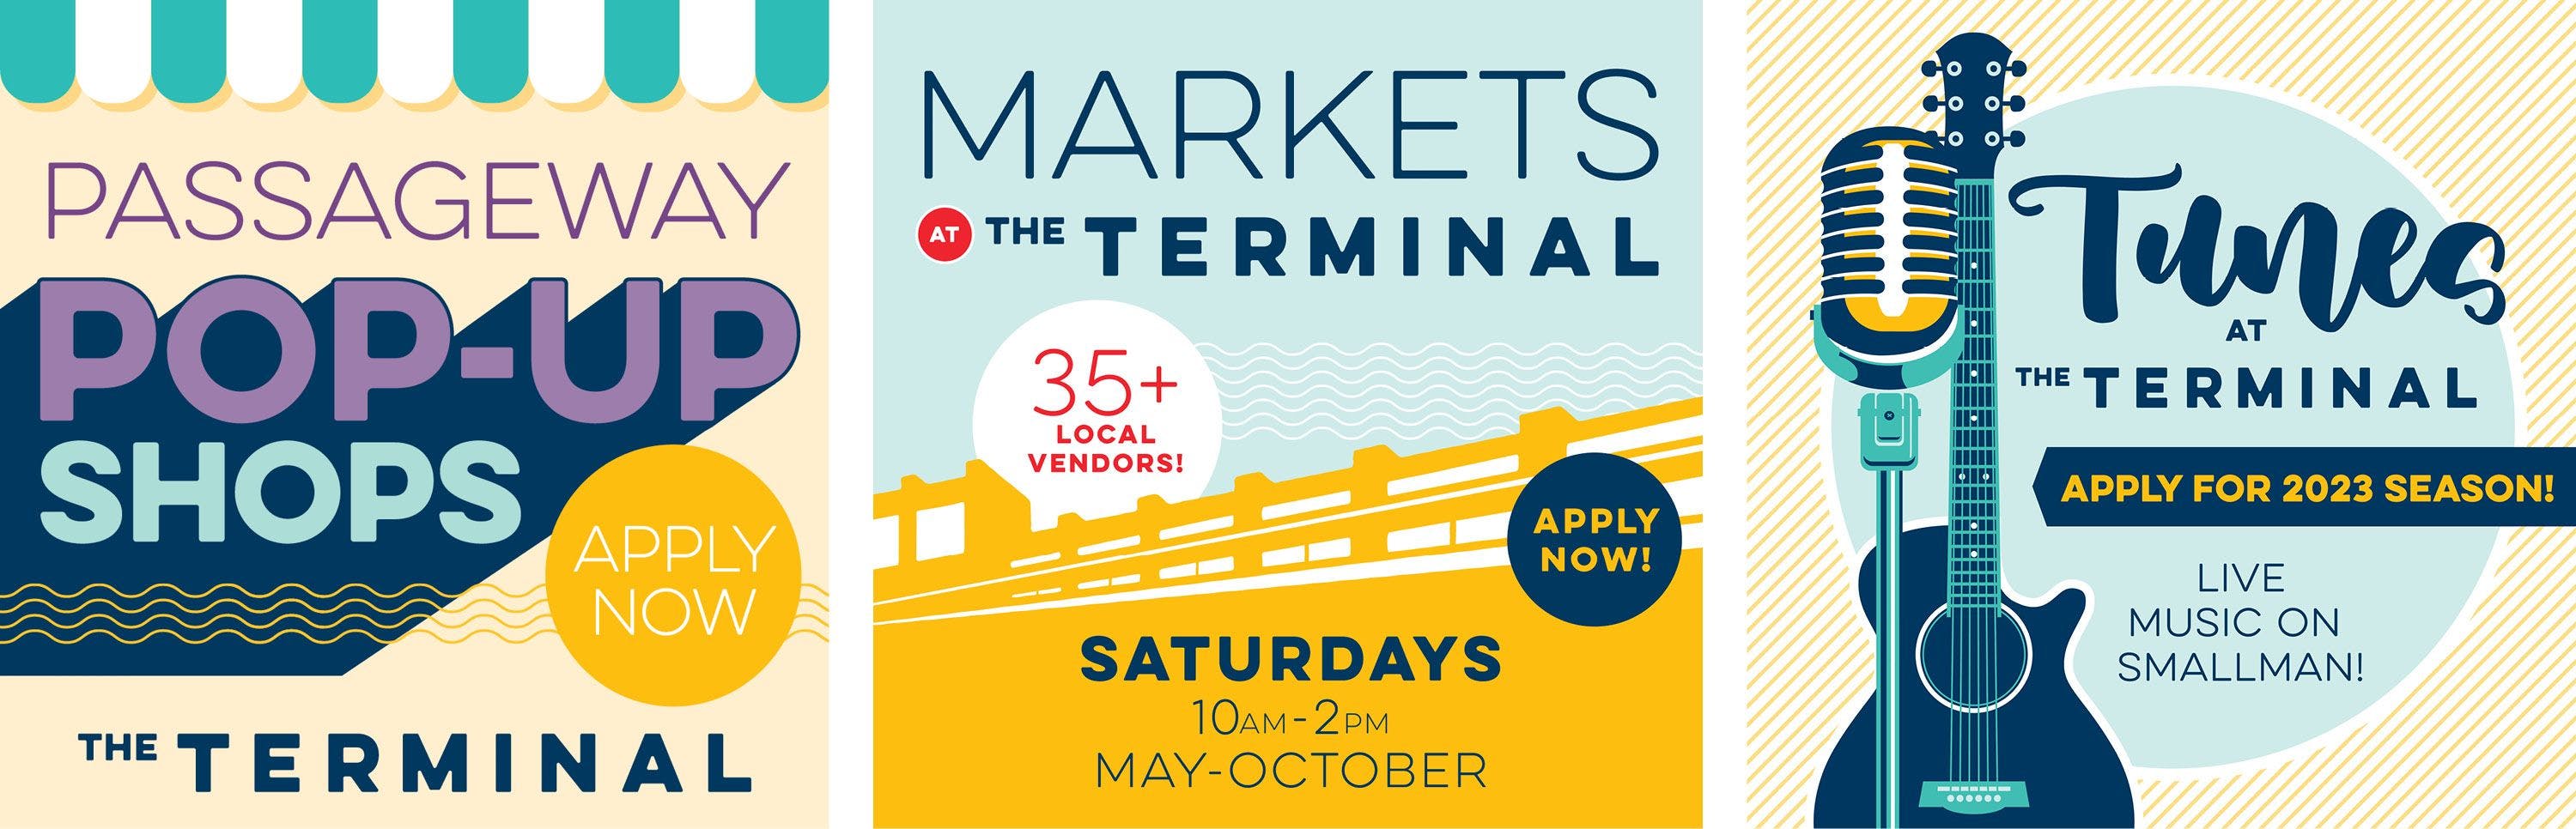 Sign up for Passageway Pop-Ups, Markets at The Terminal and Tunes at The Terminal